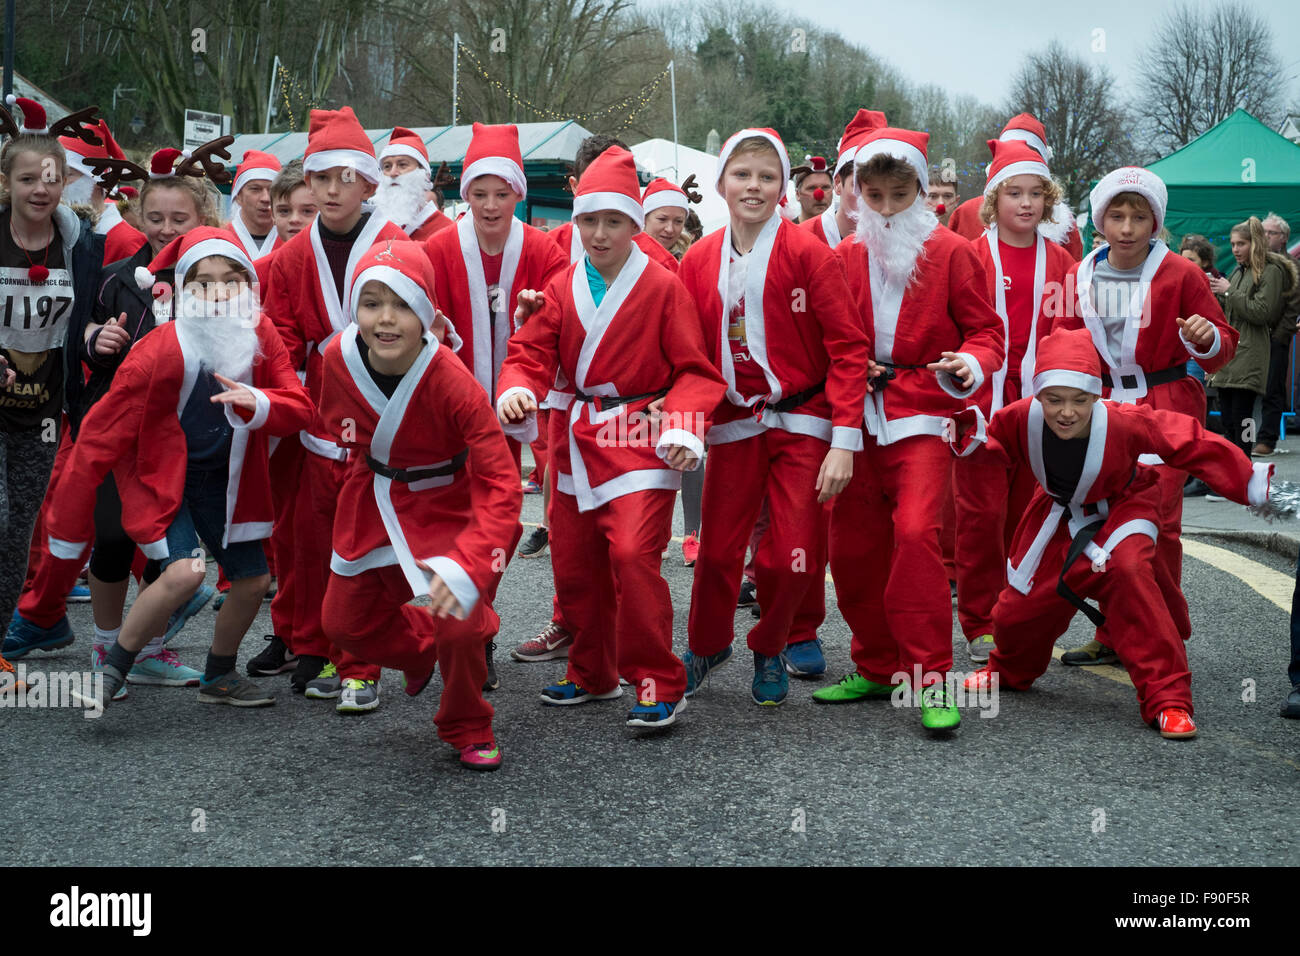 Falmouth, UK. 12th December, 2015. 100's of people took part in the Santa vs Rudolph fun run through Falmouth.  This is one in a series of 7 run, walk and surf events in the Santa series raising funds and awareness to support Cornwall Hospice Care. Credit:  Mick Buston/Alamy Live News Stock Photo